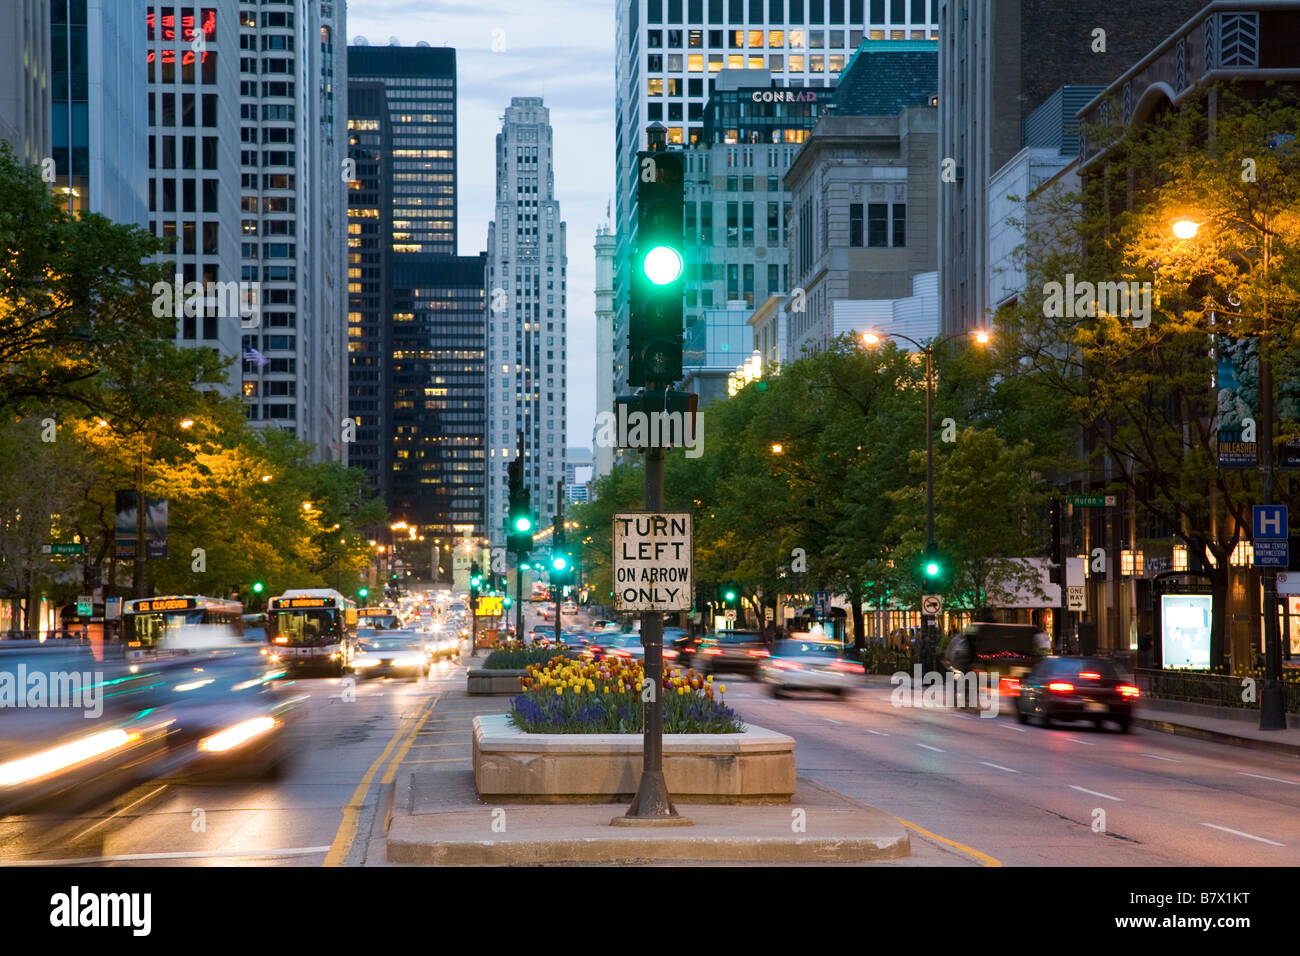 ILLINOIS Chicago Traffic signal in median of Michigan Avenue at dusk blur of cars passing left turn on arrow sign Stock Photo